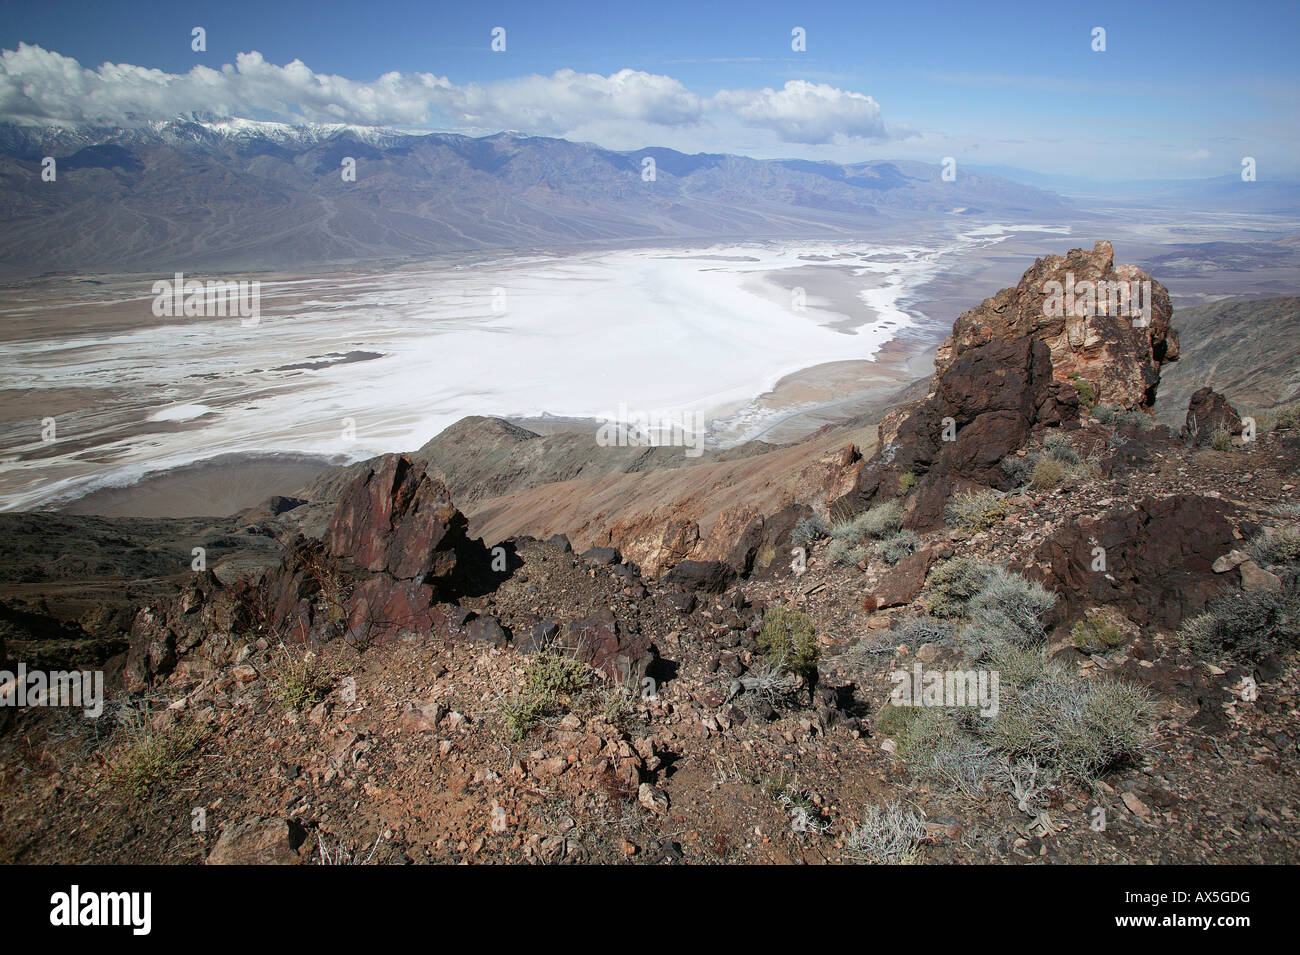 Borax lakes seen from Dante's View, Death Valley National Park, California, USA, North America Stock Photo